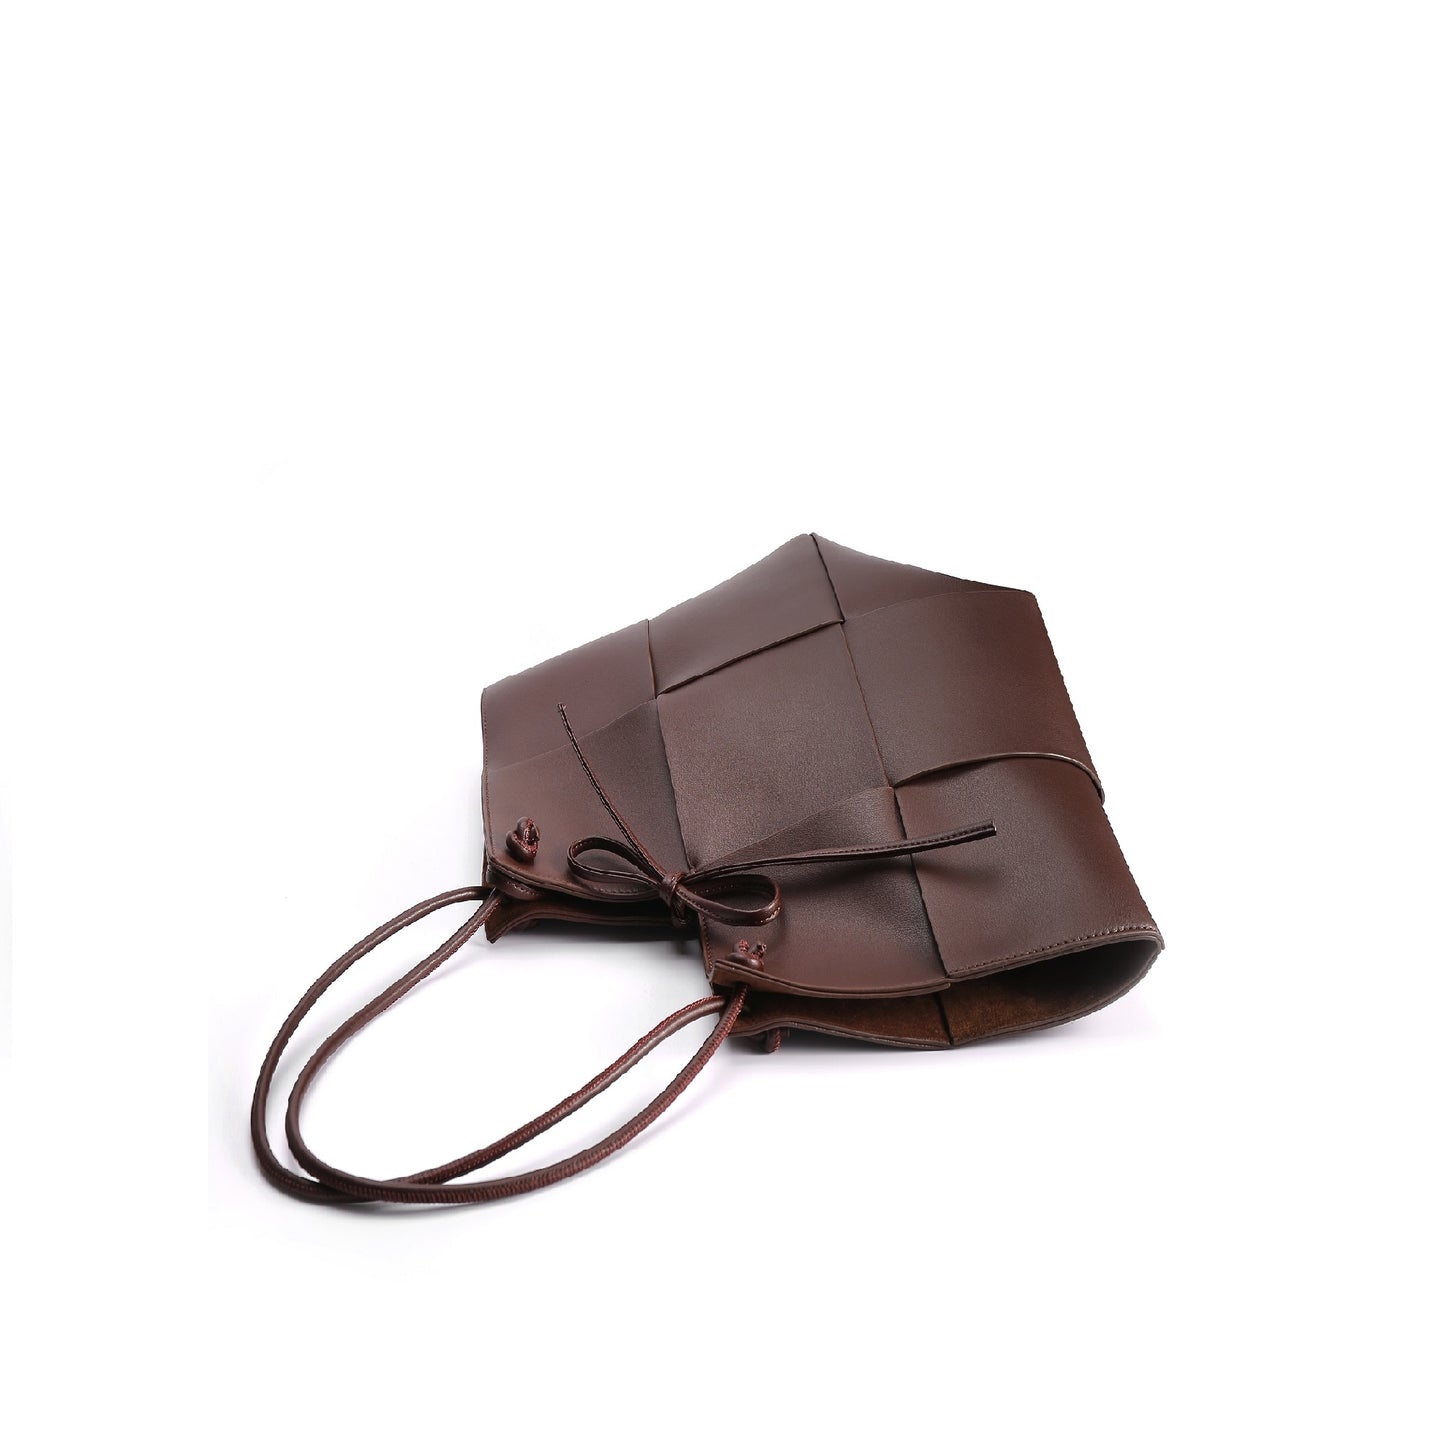 Taylor Contexture Leather Bag, Chocolate(Pre-order, ship on May 15th)